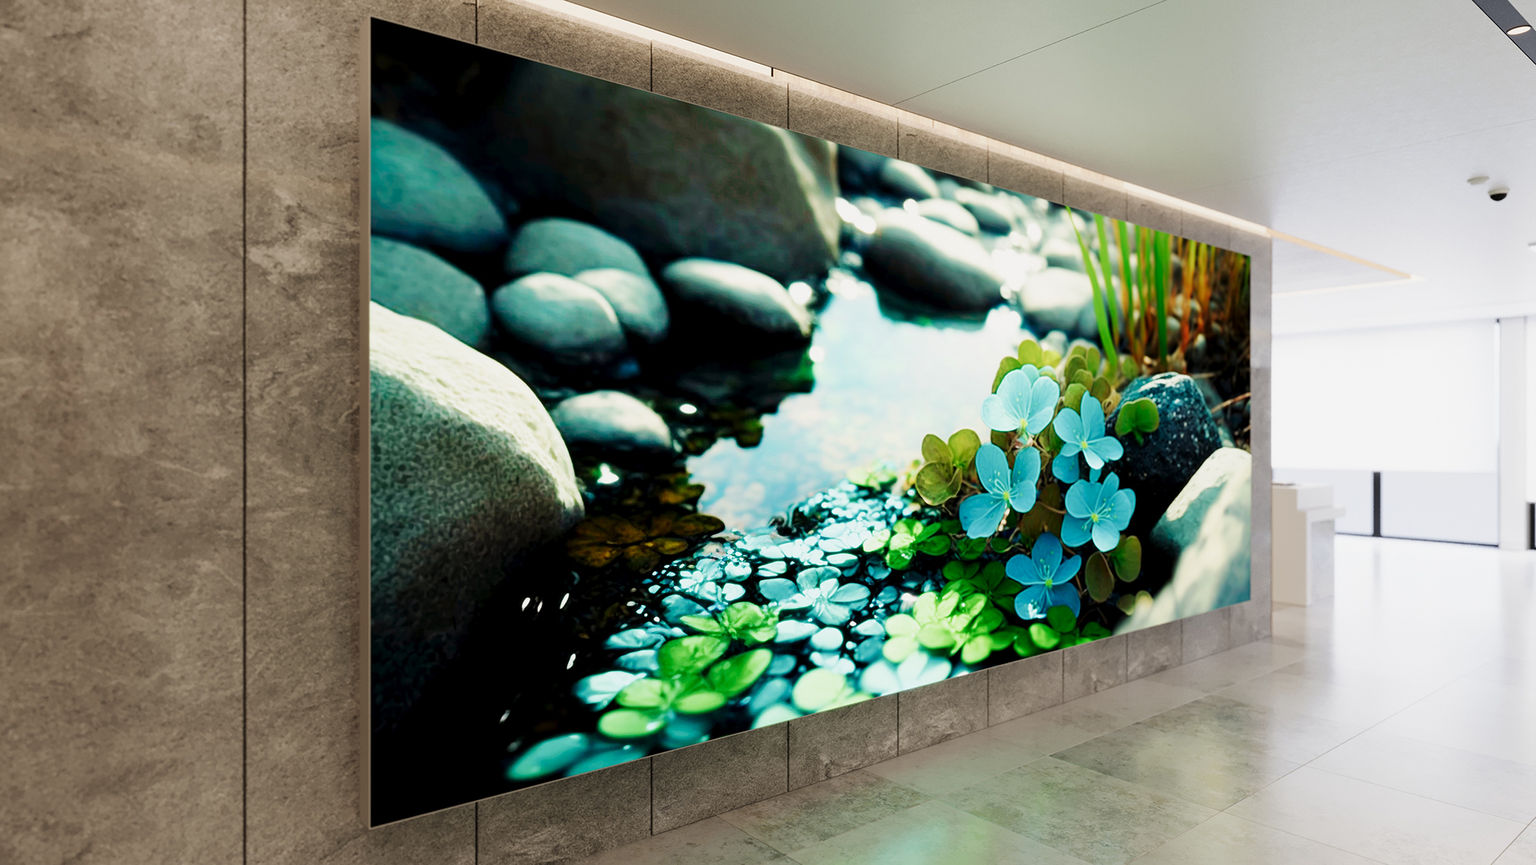 A large scale illuminated silicone edge graphic art installation in a hospital lobby featuring a calming nature scene.